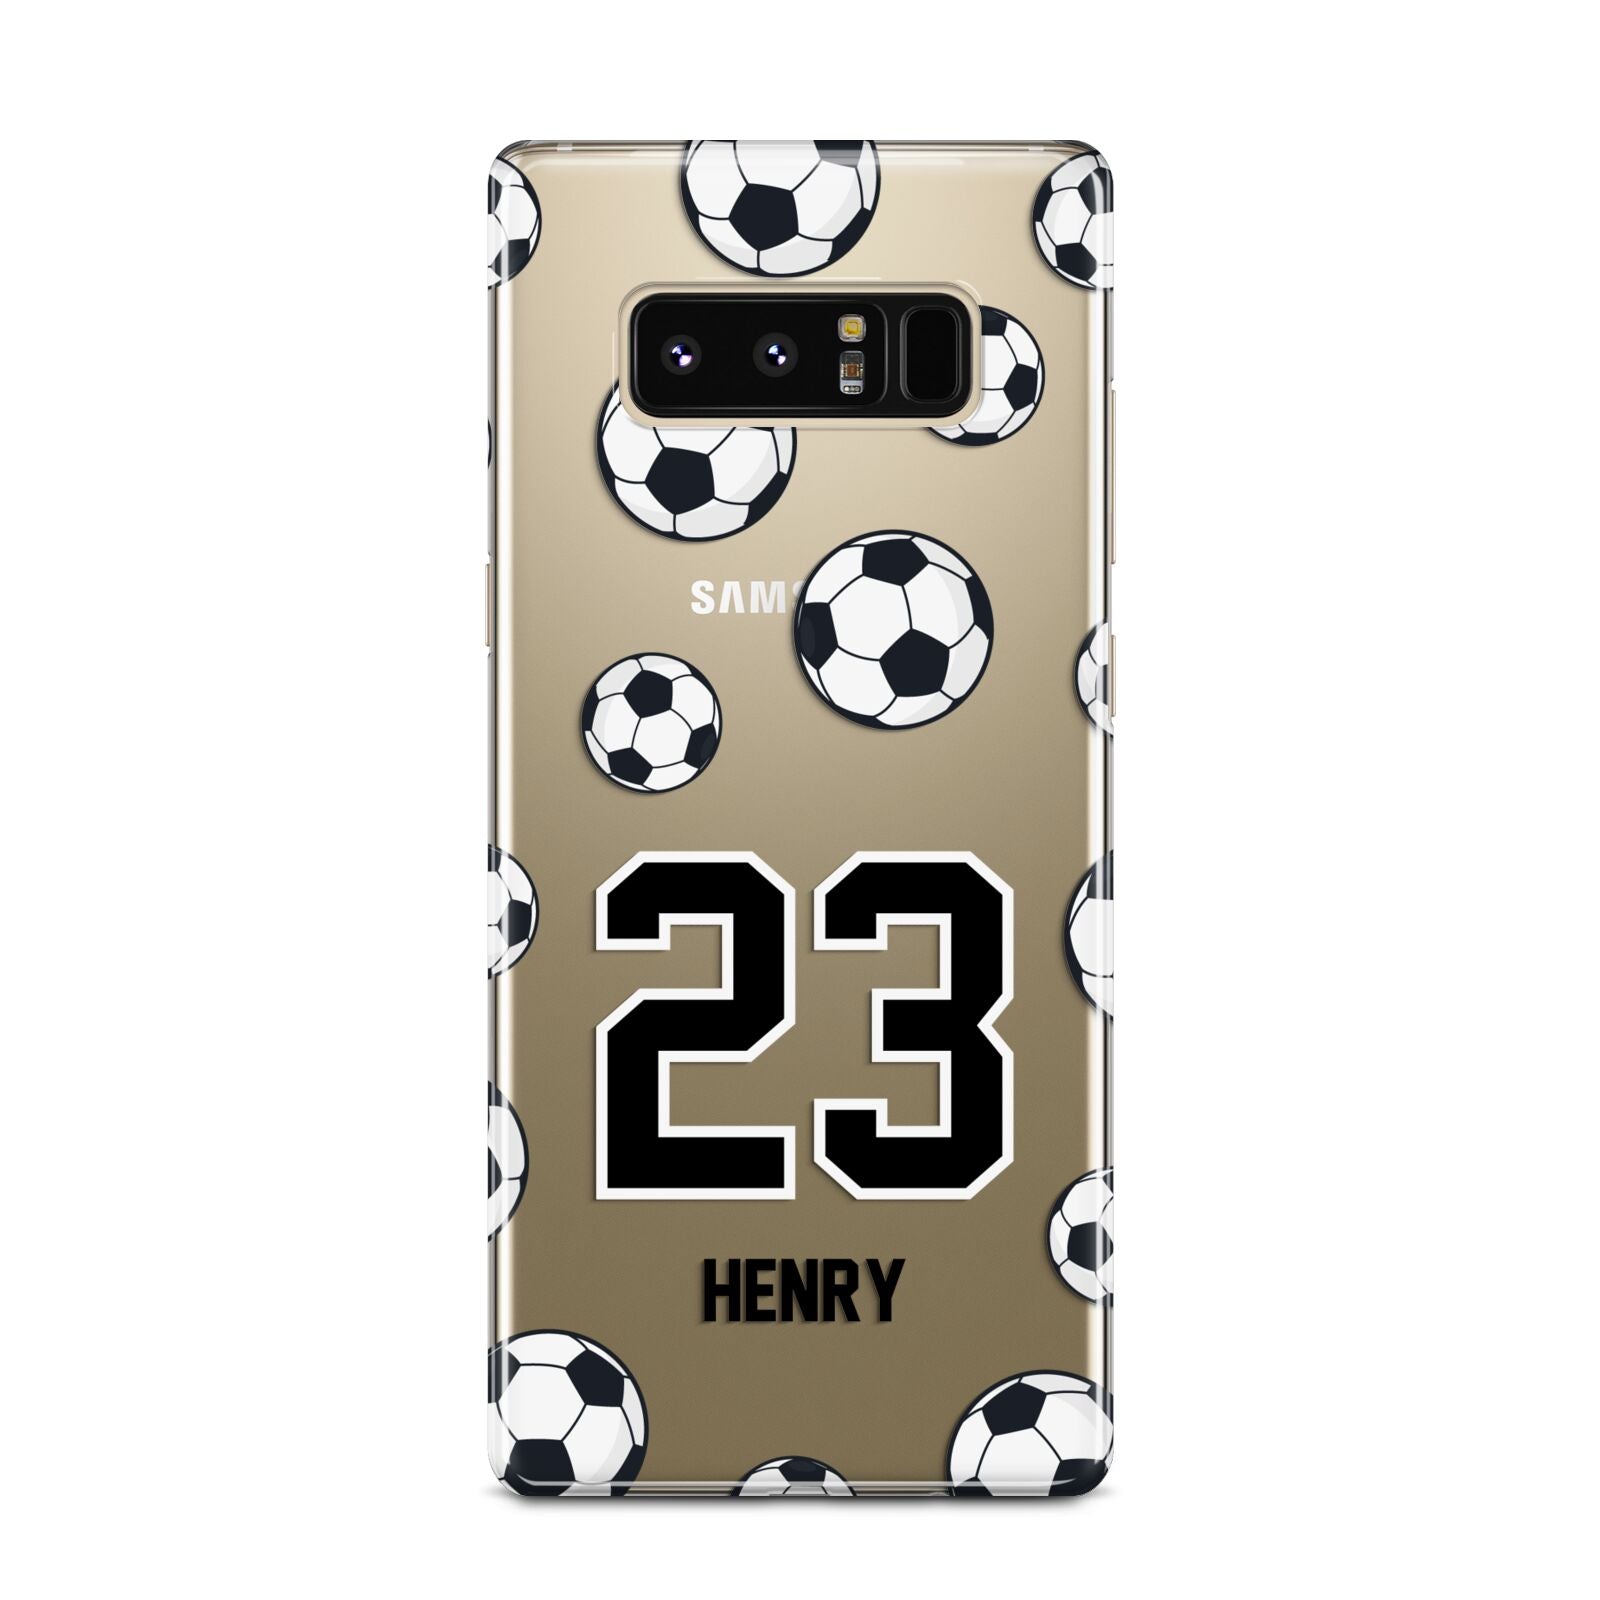 Personalised Football Samsung Galaxy Note 8 Case